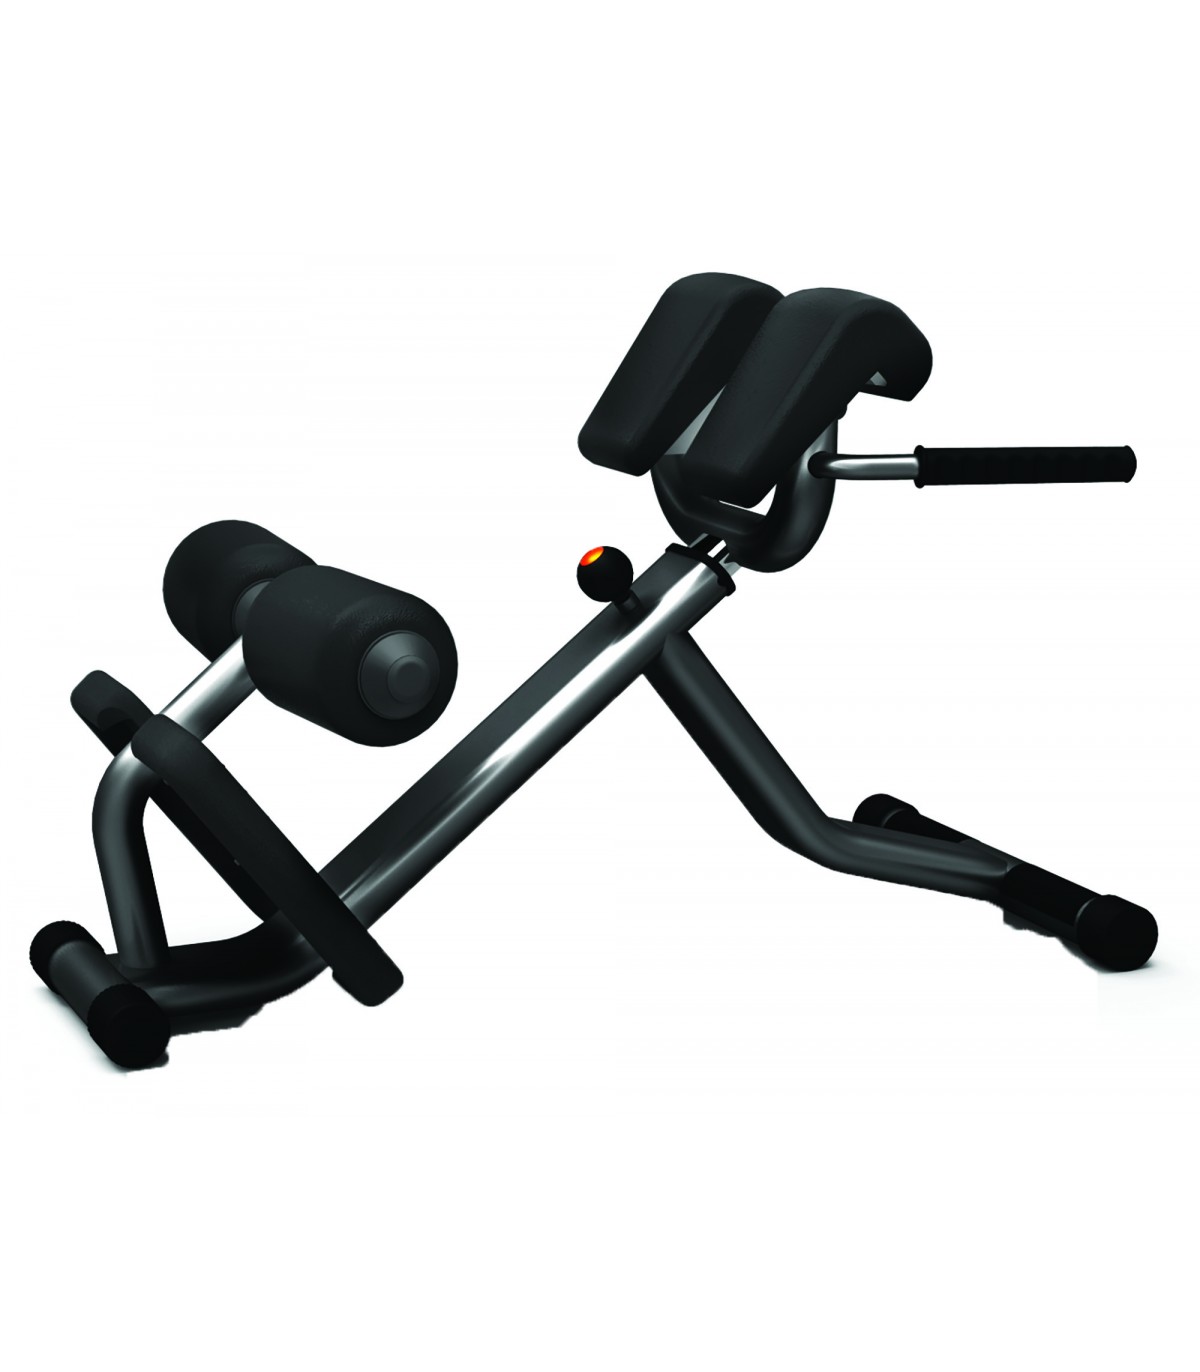 Banc musculation lombaire TOORX Professionnel